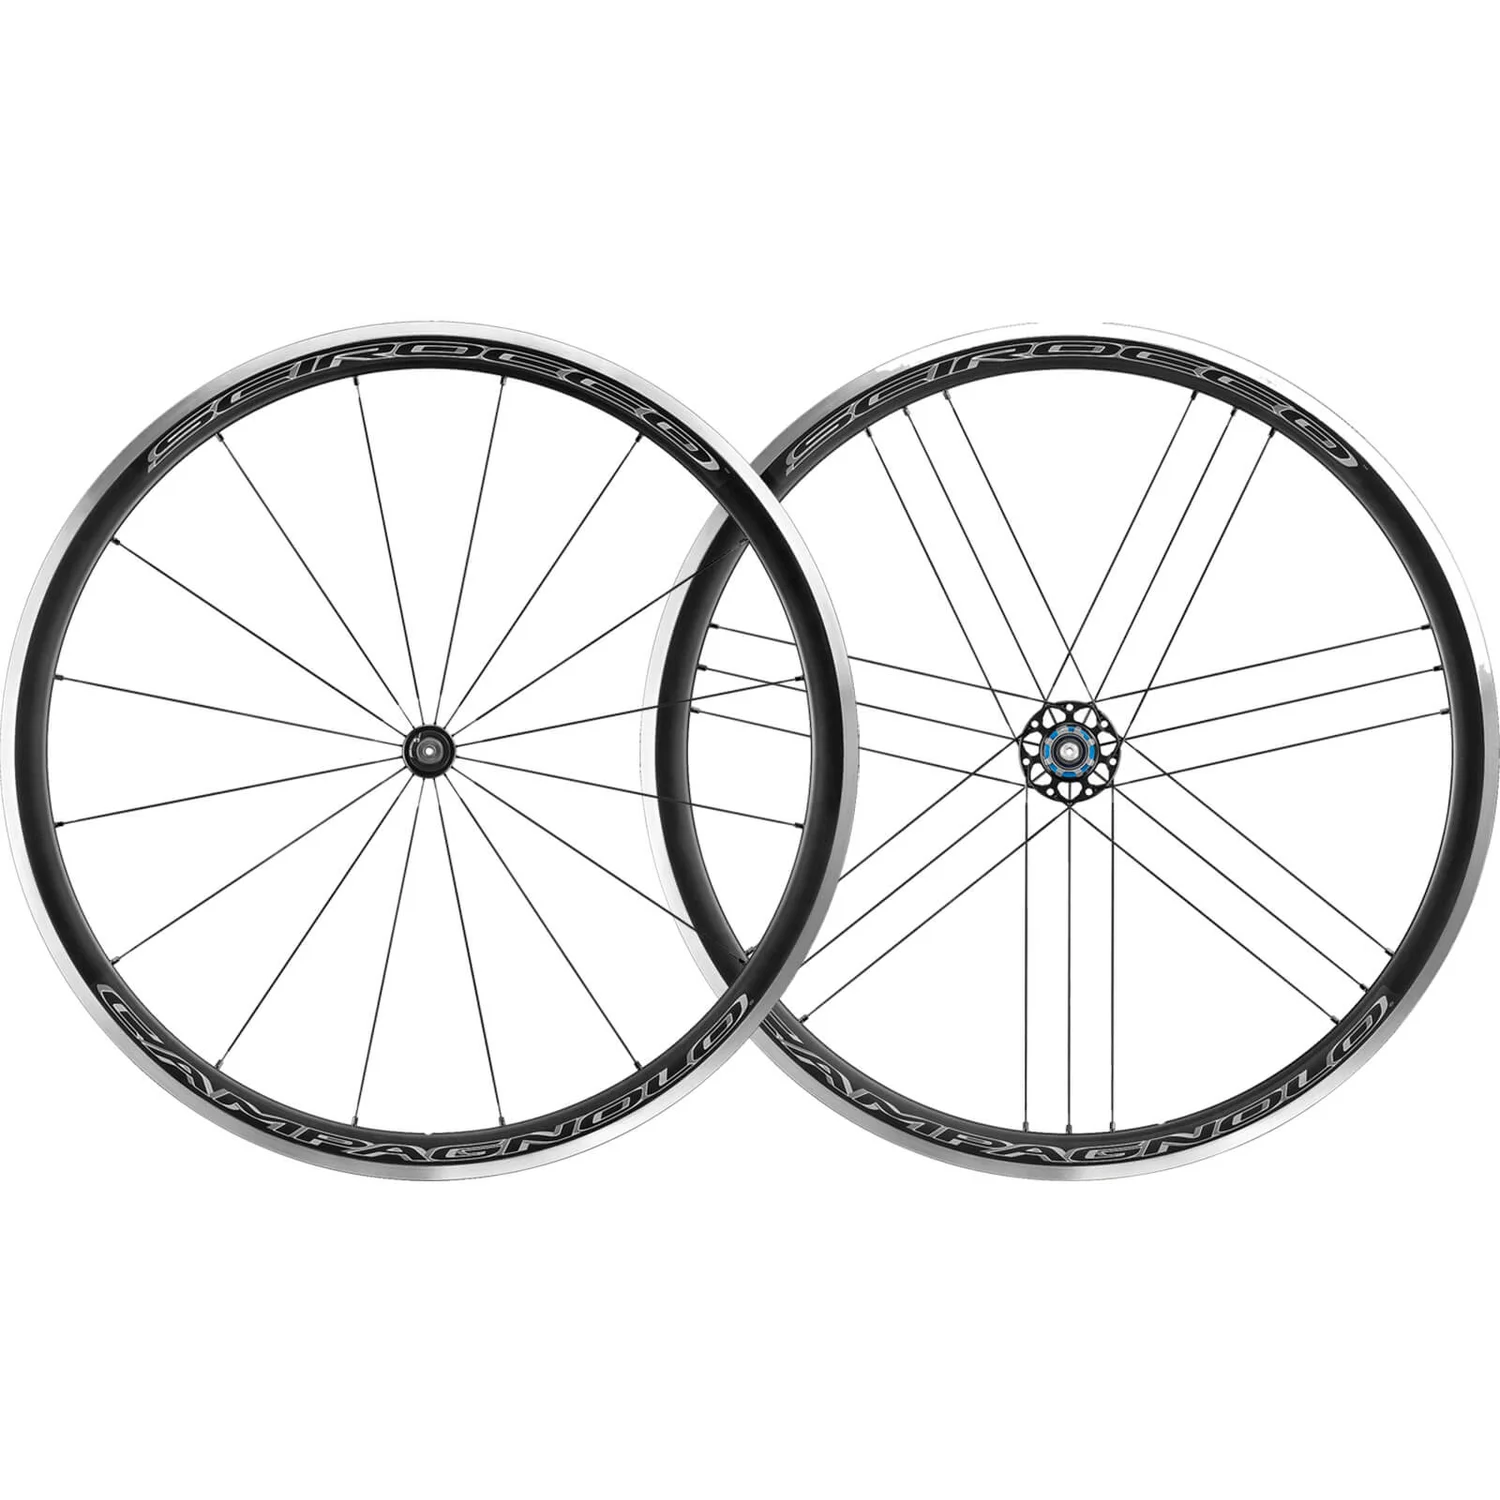 Campagnolo (カンパニョーロ) Scirocco(シロッコ) C17 